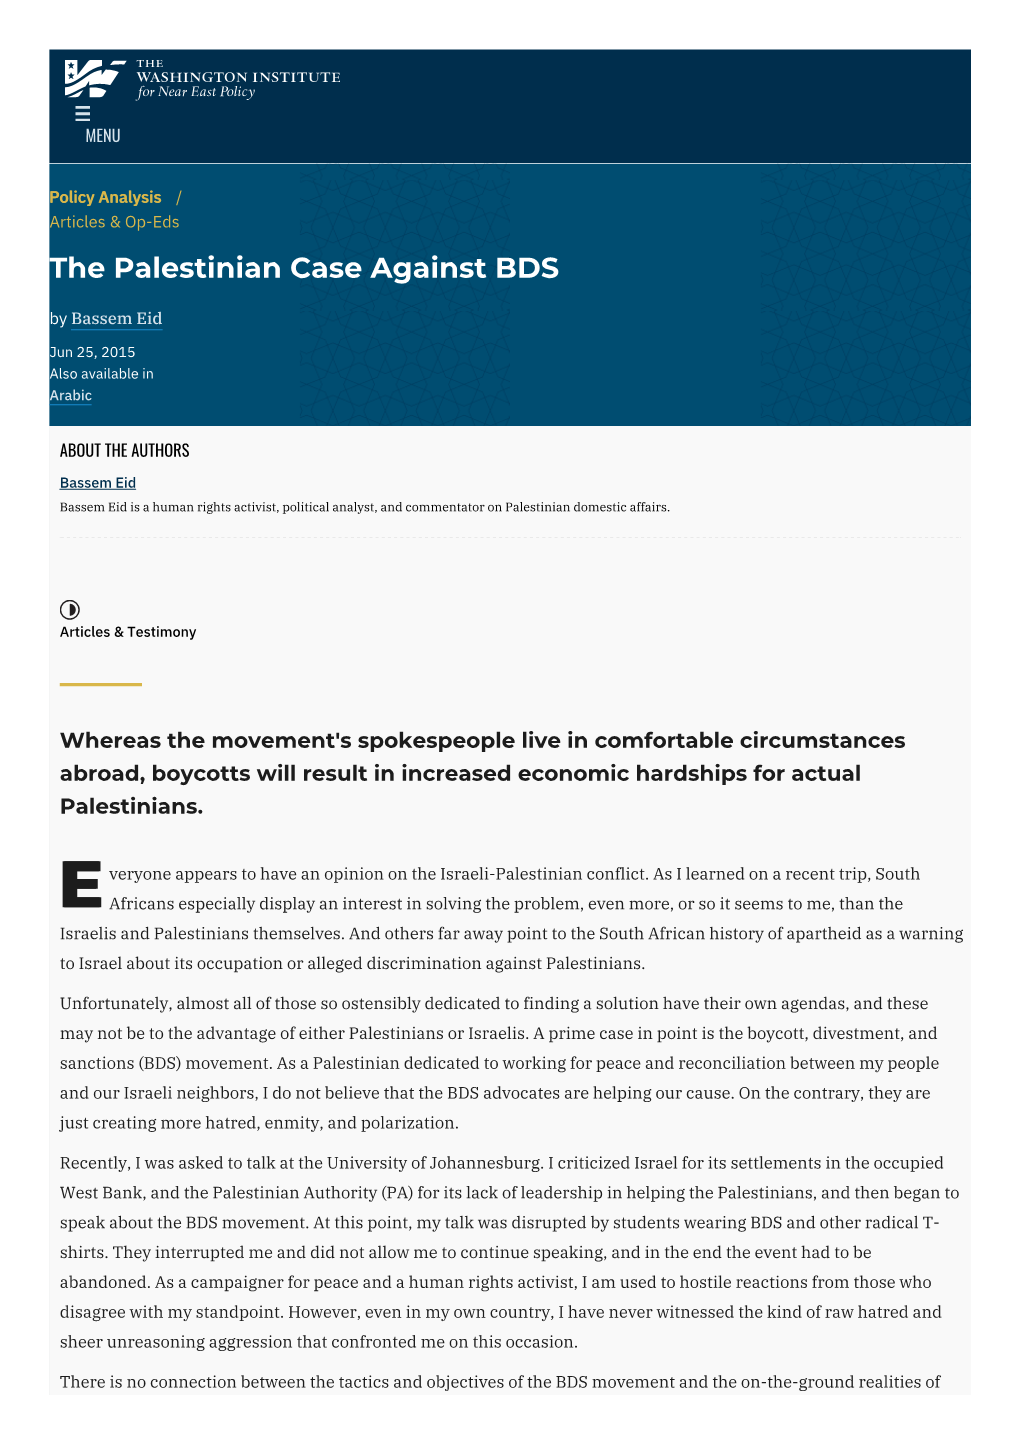 The Palestinian Case Against BDS | the Washington Institute